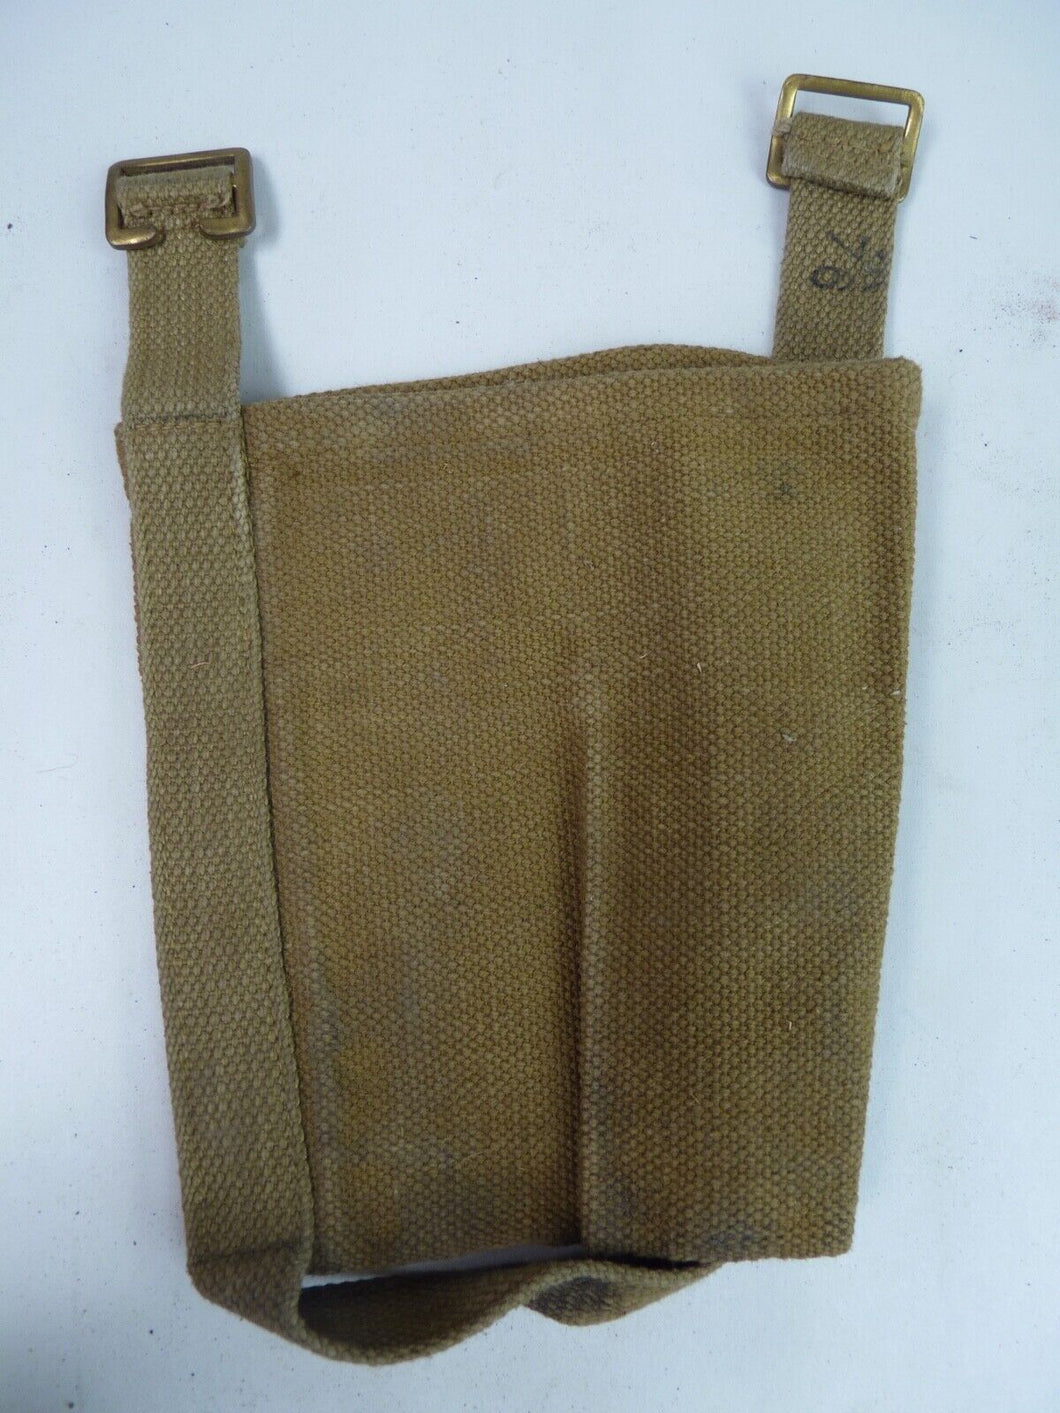 Original WW2 British Army Soldiers Water Bottle Carrier Harness - Dated 1942